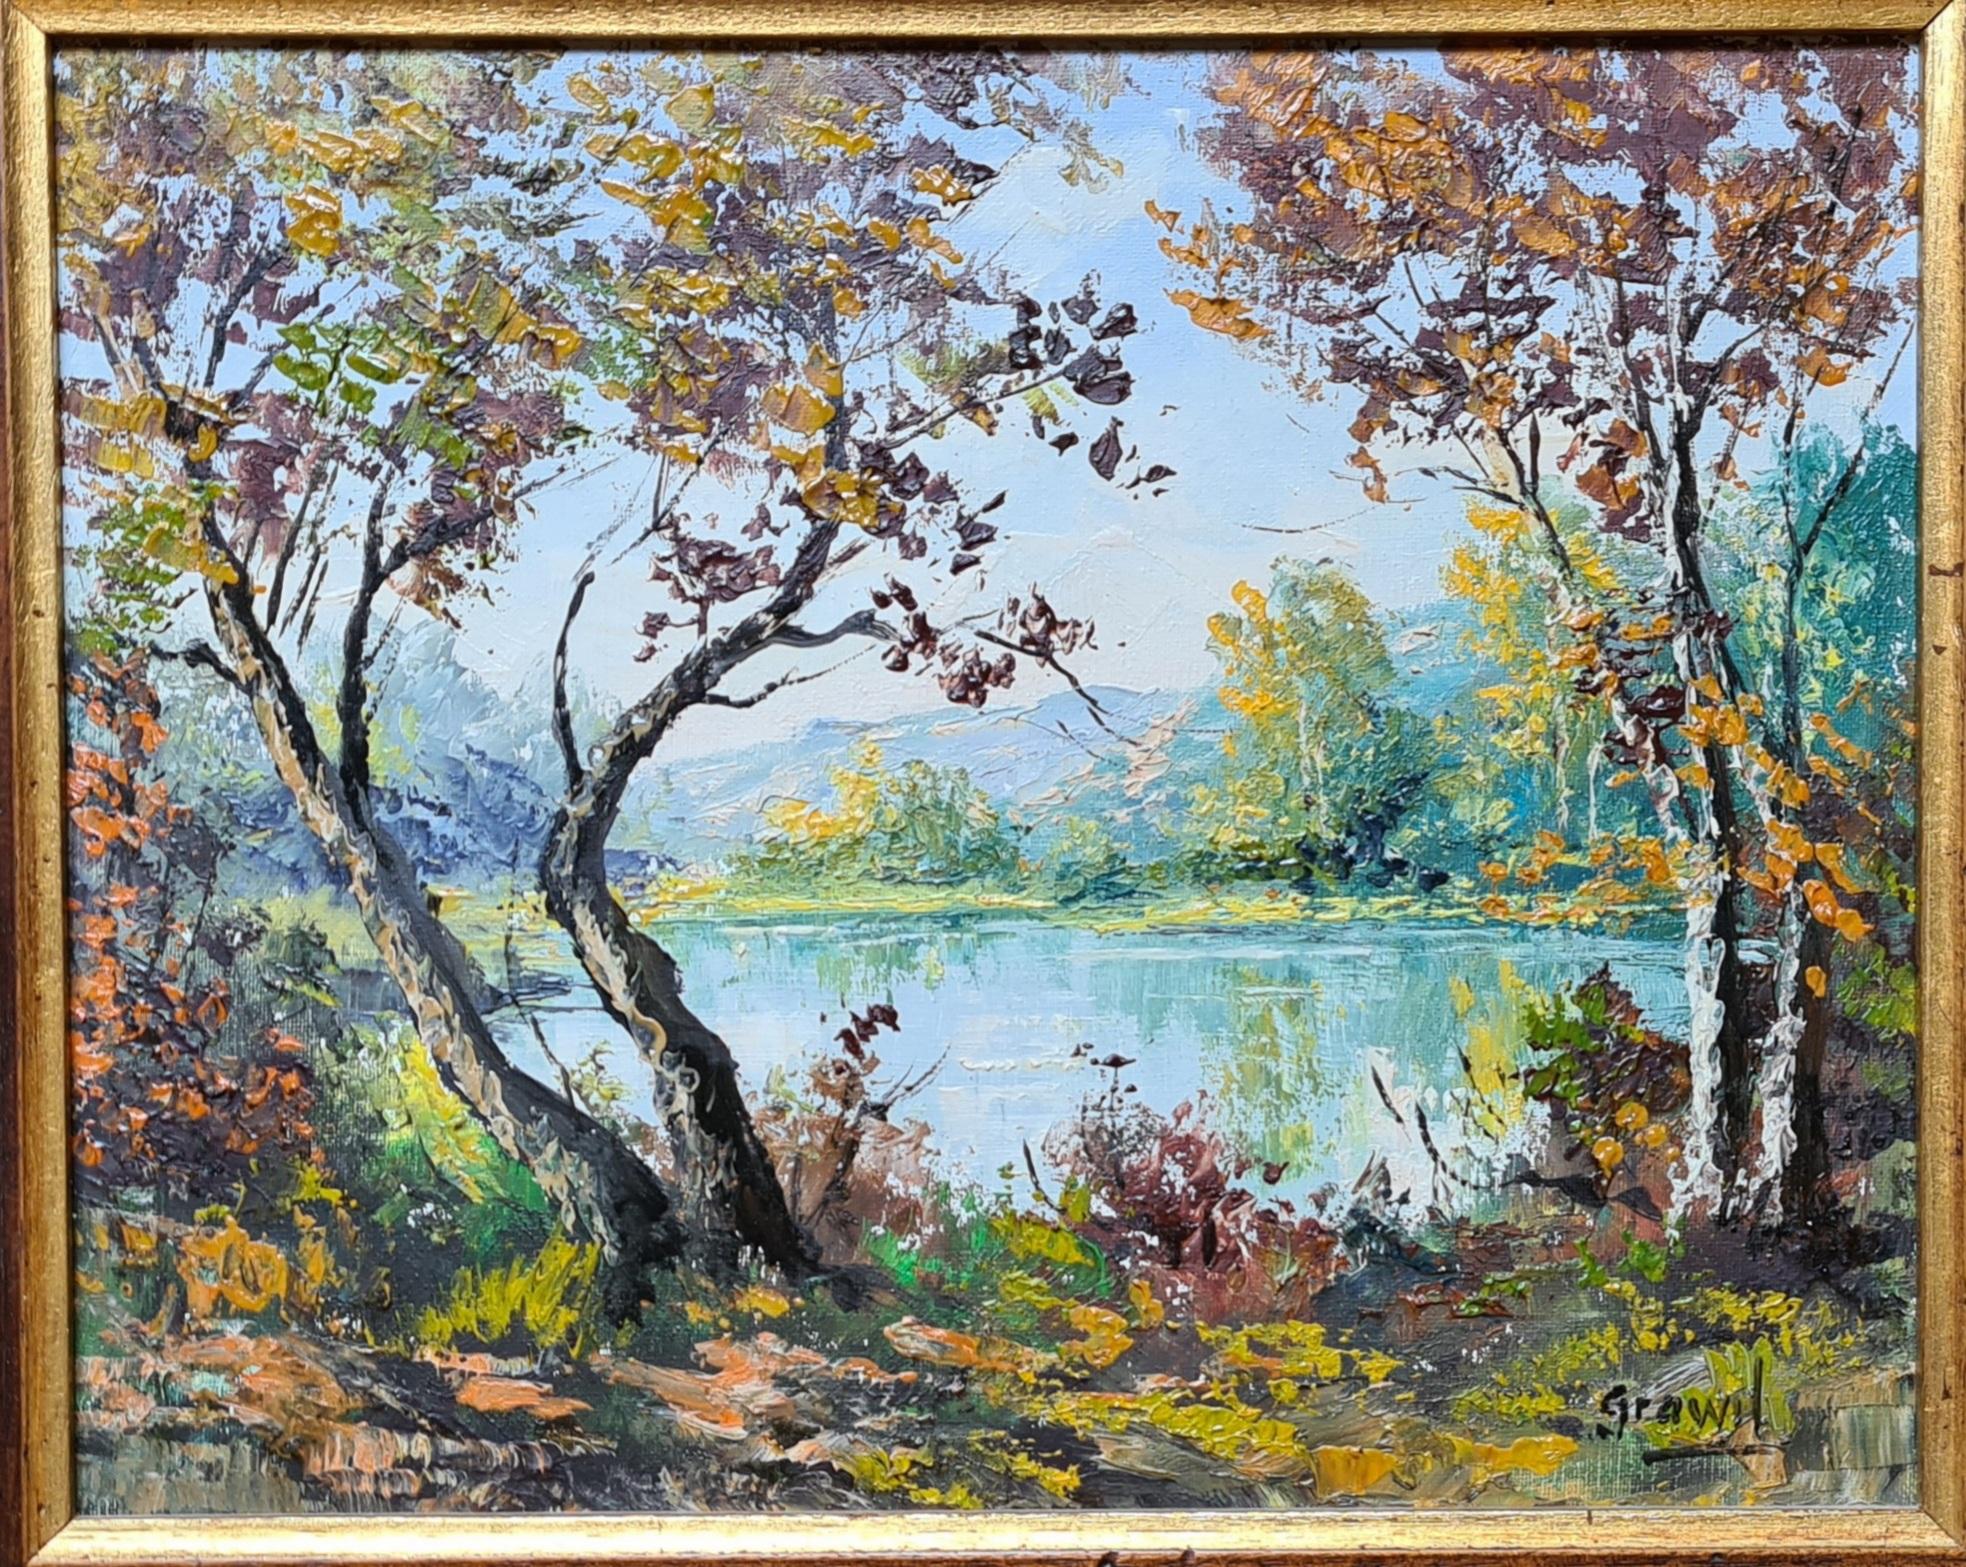 Maurice Schwab aka 'Grawil' Landscape Painting - Summer at the Lake. French Oil on Canvas Landscape.